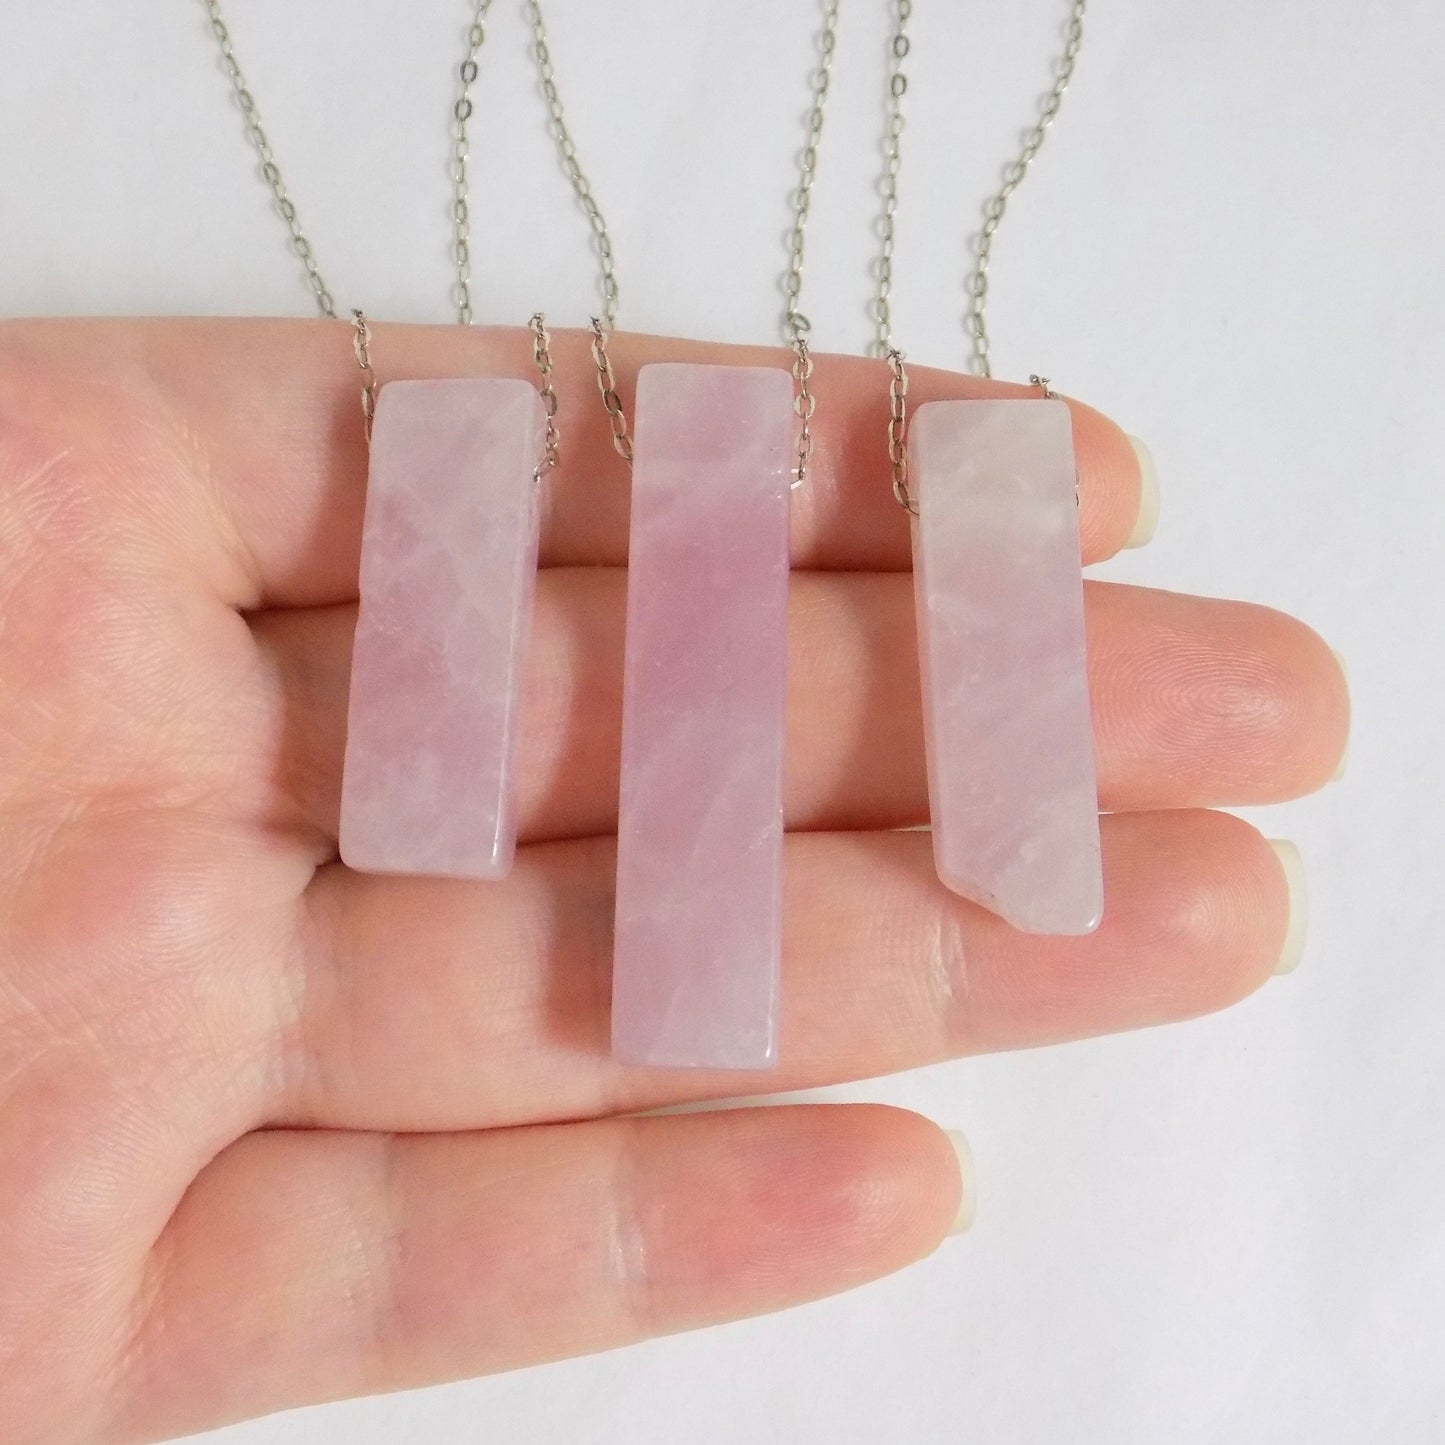 Christmas Gift, Rose Quartz Necklace, Rose Quartz Jewelry, Crystal Point, Light Pink Stone, Gold Or Silver Layer, Wife Gift Women K4-01